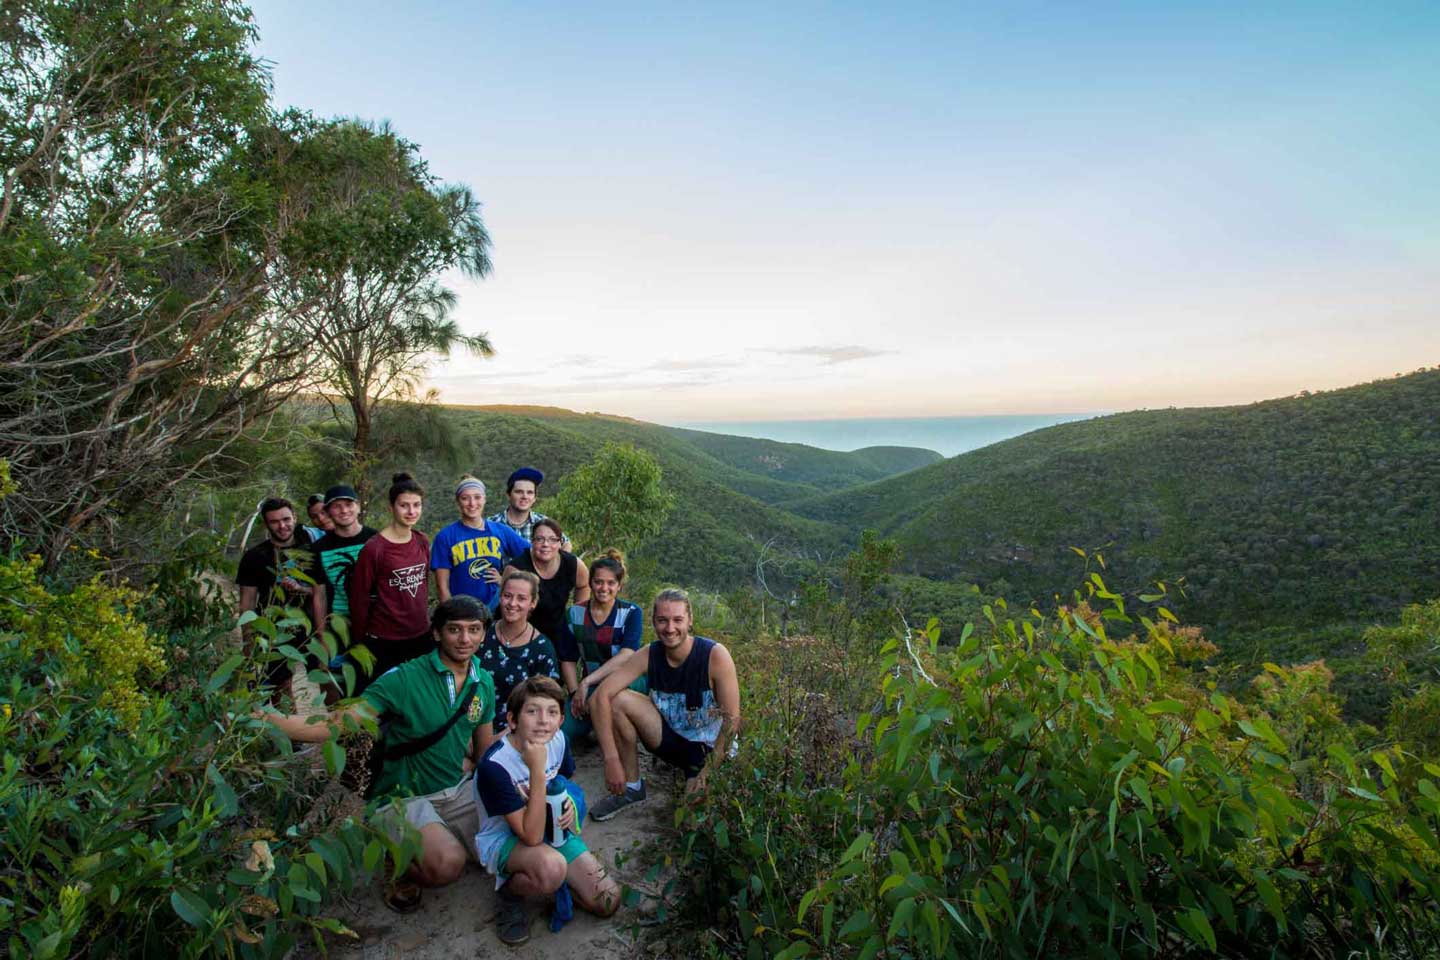 Students in a group photo while hiking